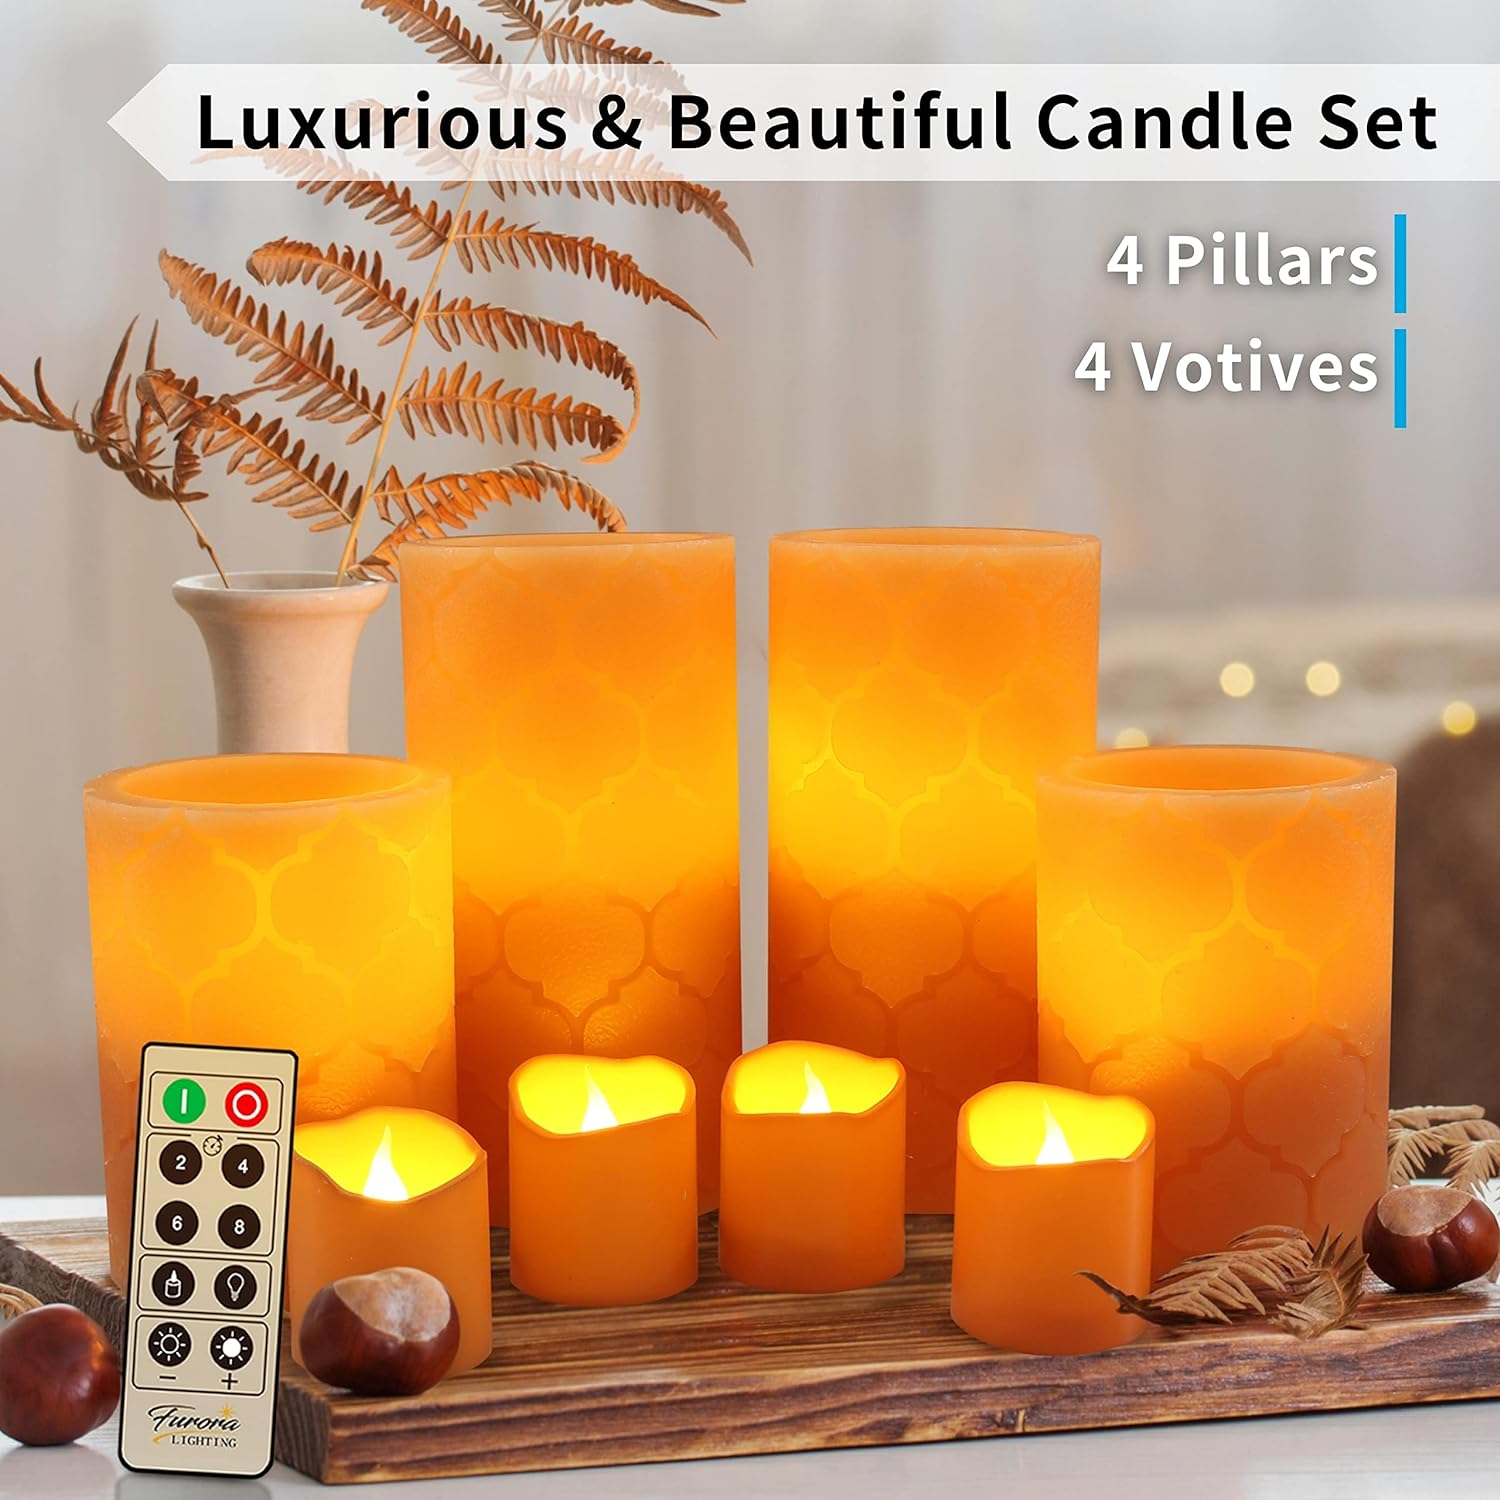 FURORA LIGHTING LED Flameless Candles with Remote – Battery-Operated Flameless Candles Bulk Set of 8 Fake Candles – Small Flameless Candles & Christmas Centerpieces for Tables, Orange-Nordic